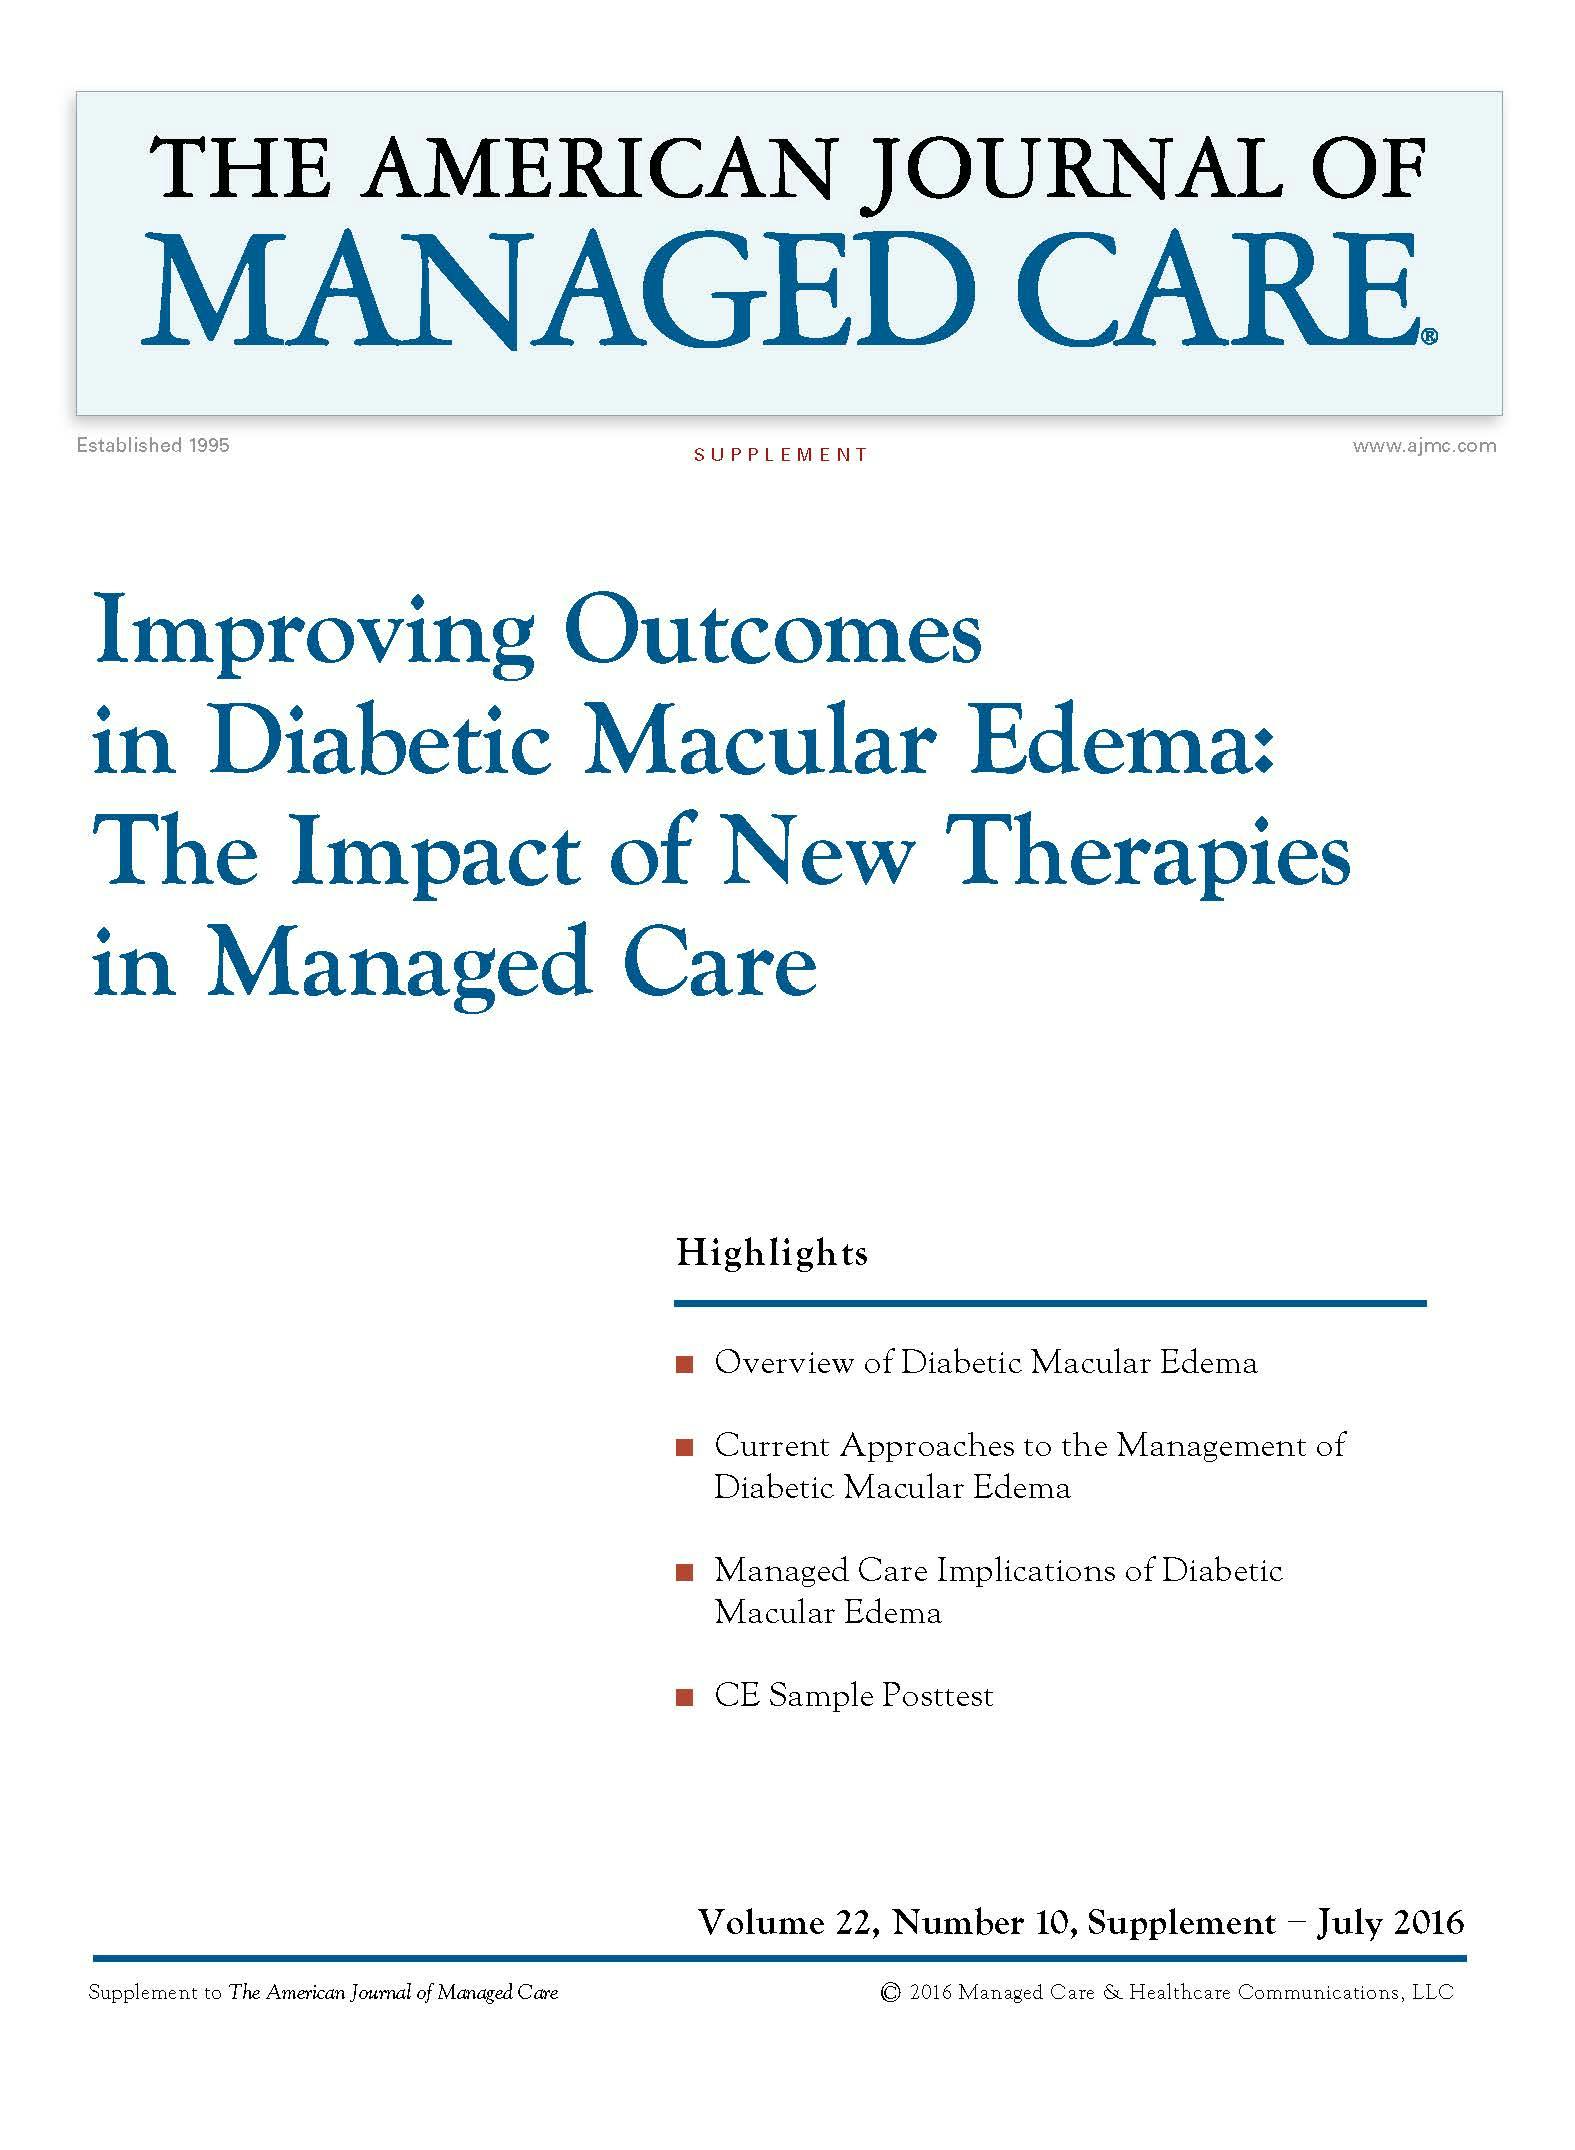 Improving Outcomes in Diabetic Macular Edema: The Impact of New Therapies in Managed Care